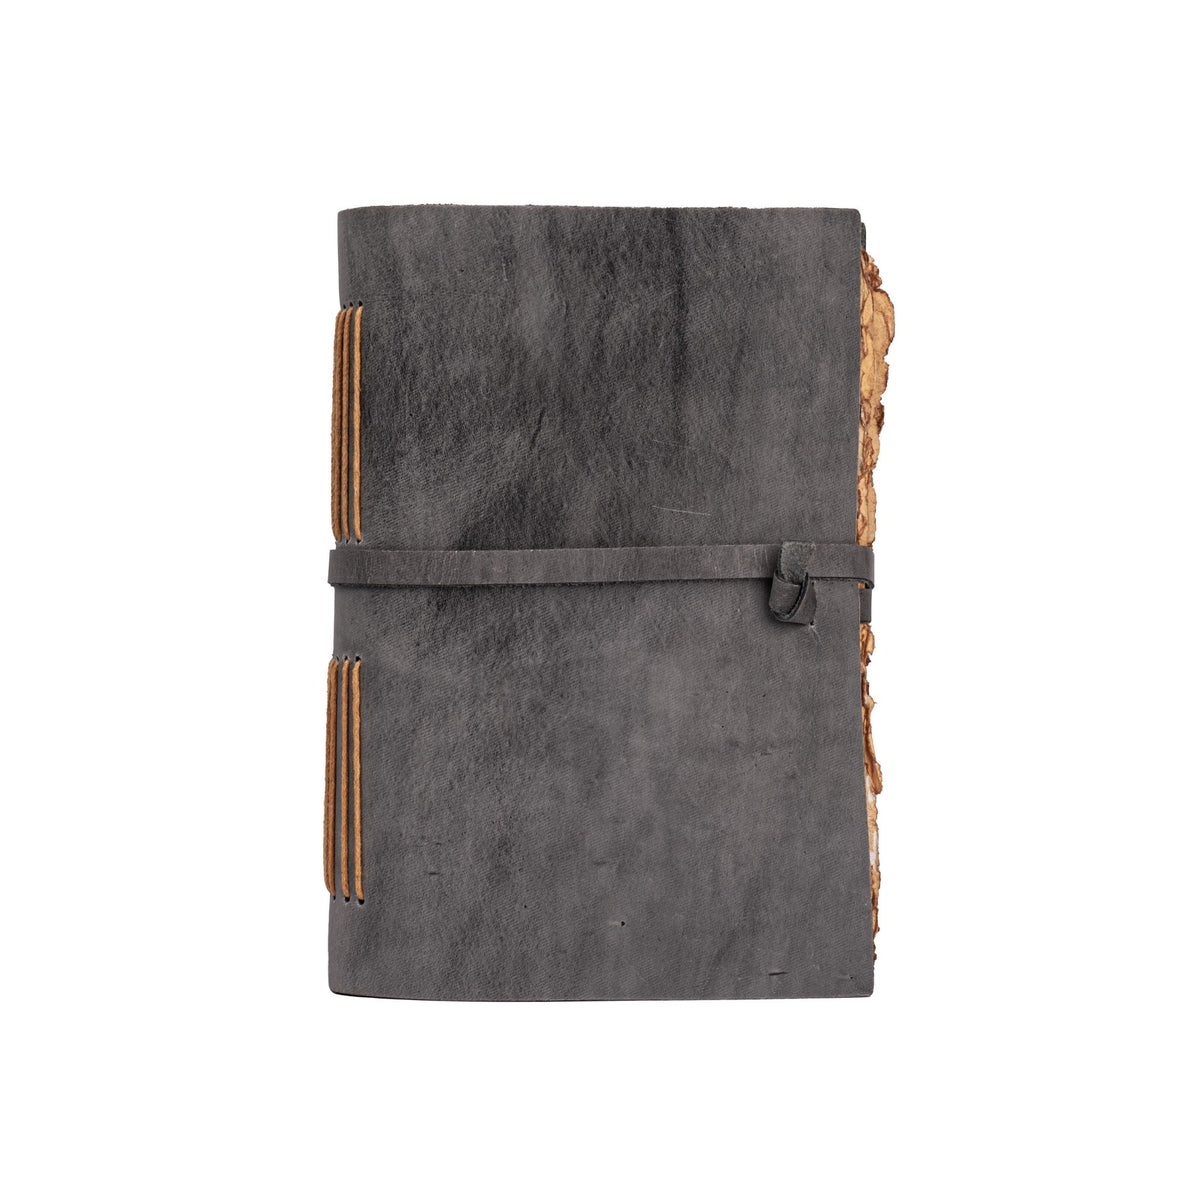 Leather Village grey colour leather journal